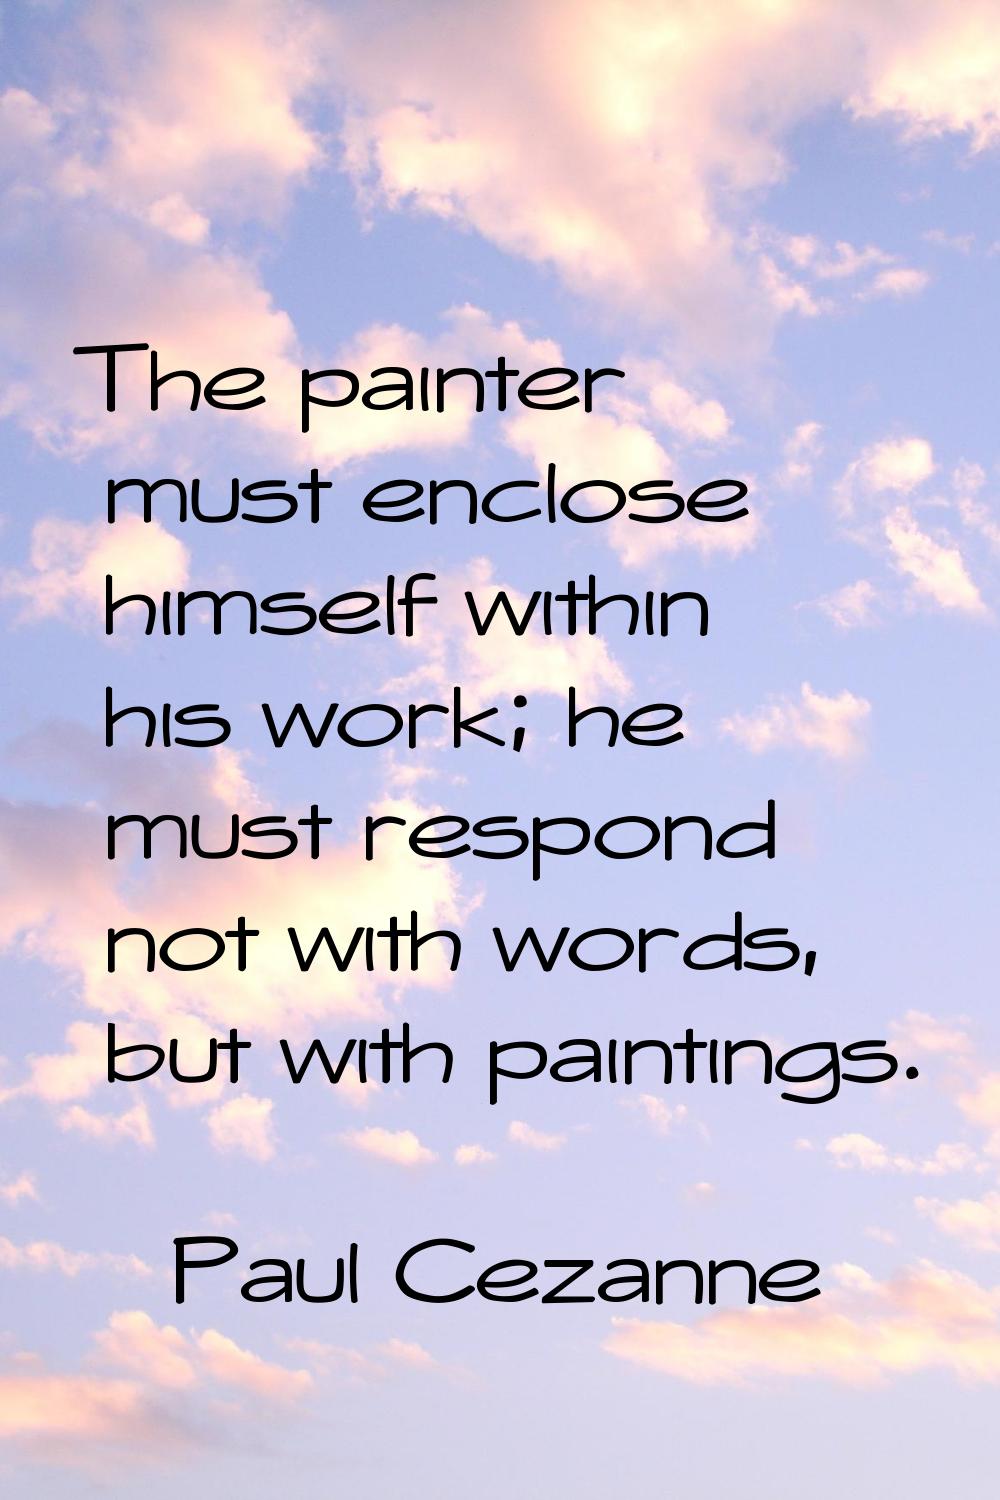 The painter must enclose himself within his work; he must respond not with words, but with painting